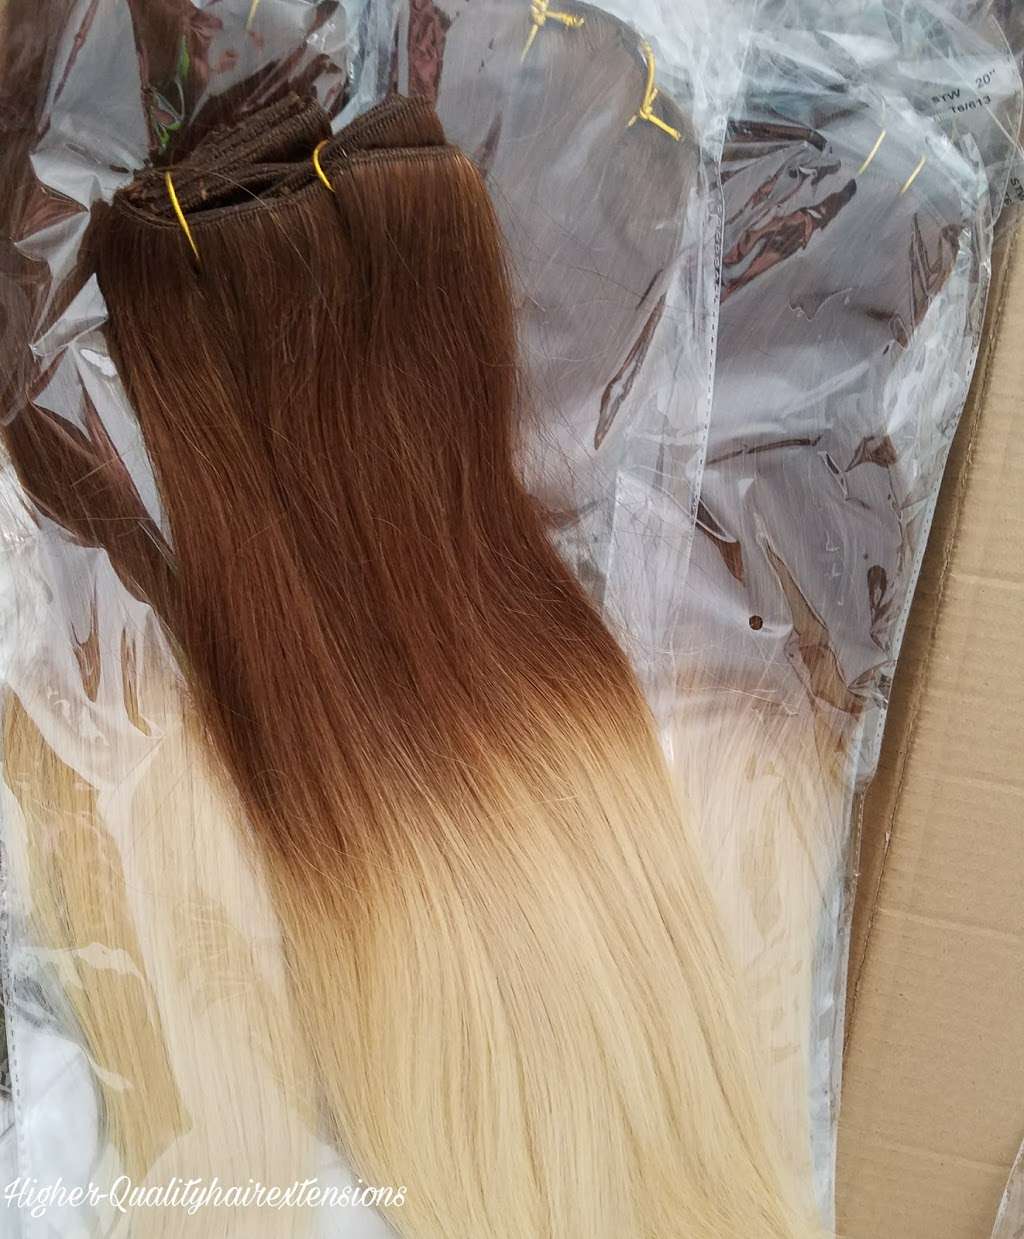 Higher-QualityHairExtensions | 6042, 10132 San Gabriel Ave, South Gate, CA 90280 | Phone: (323) 439-4446